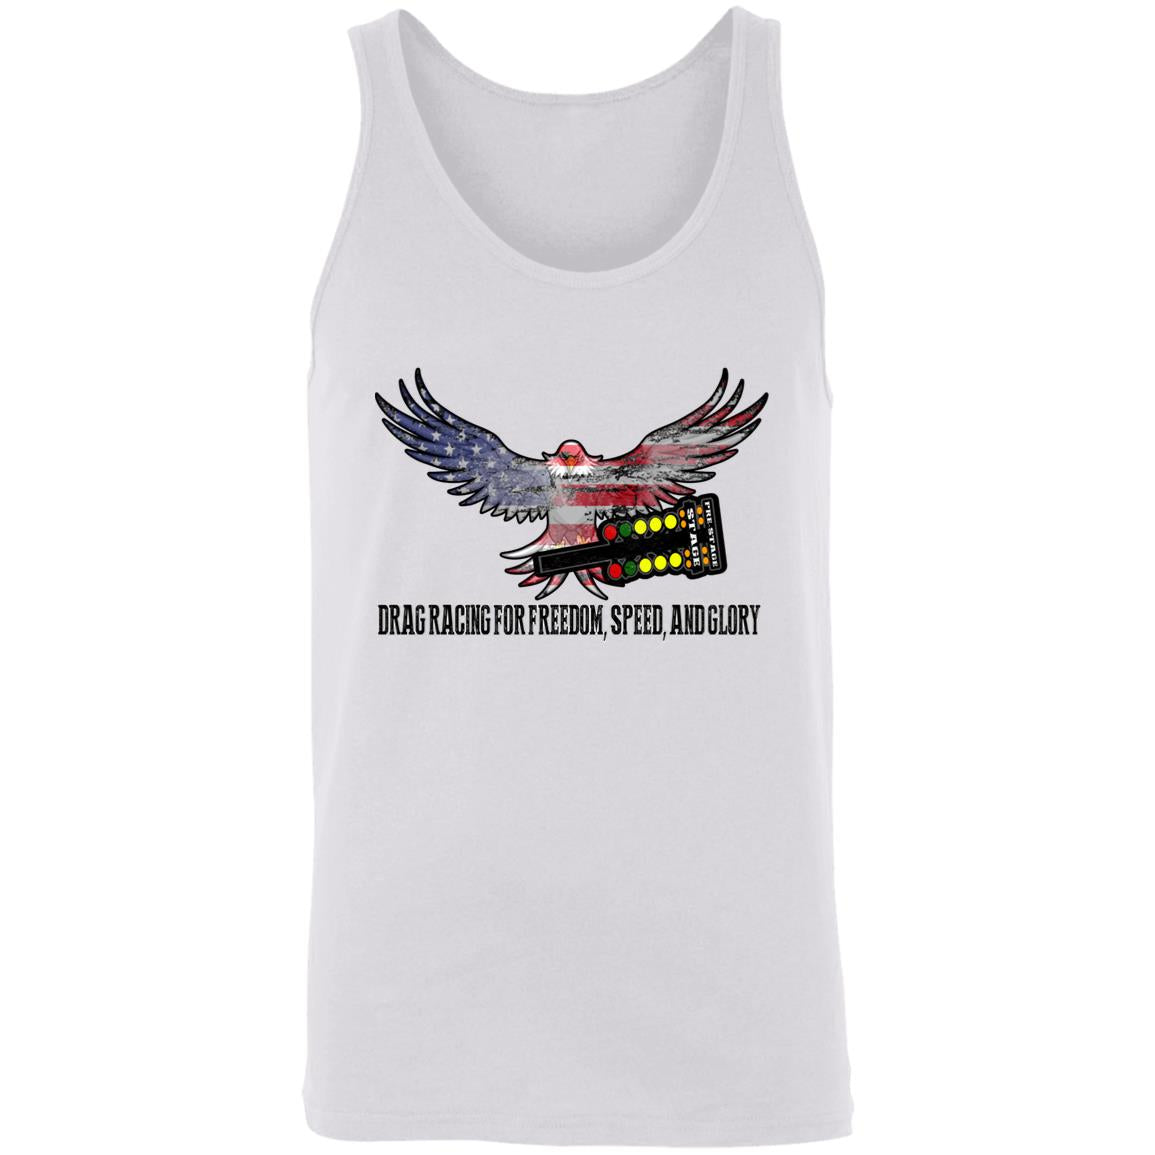 Drag Racing for Freedom, Speed, and Glory Unisex Tank